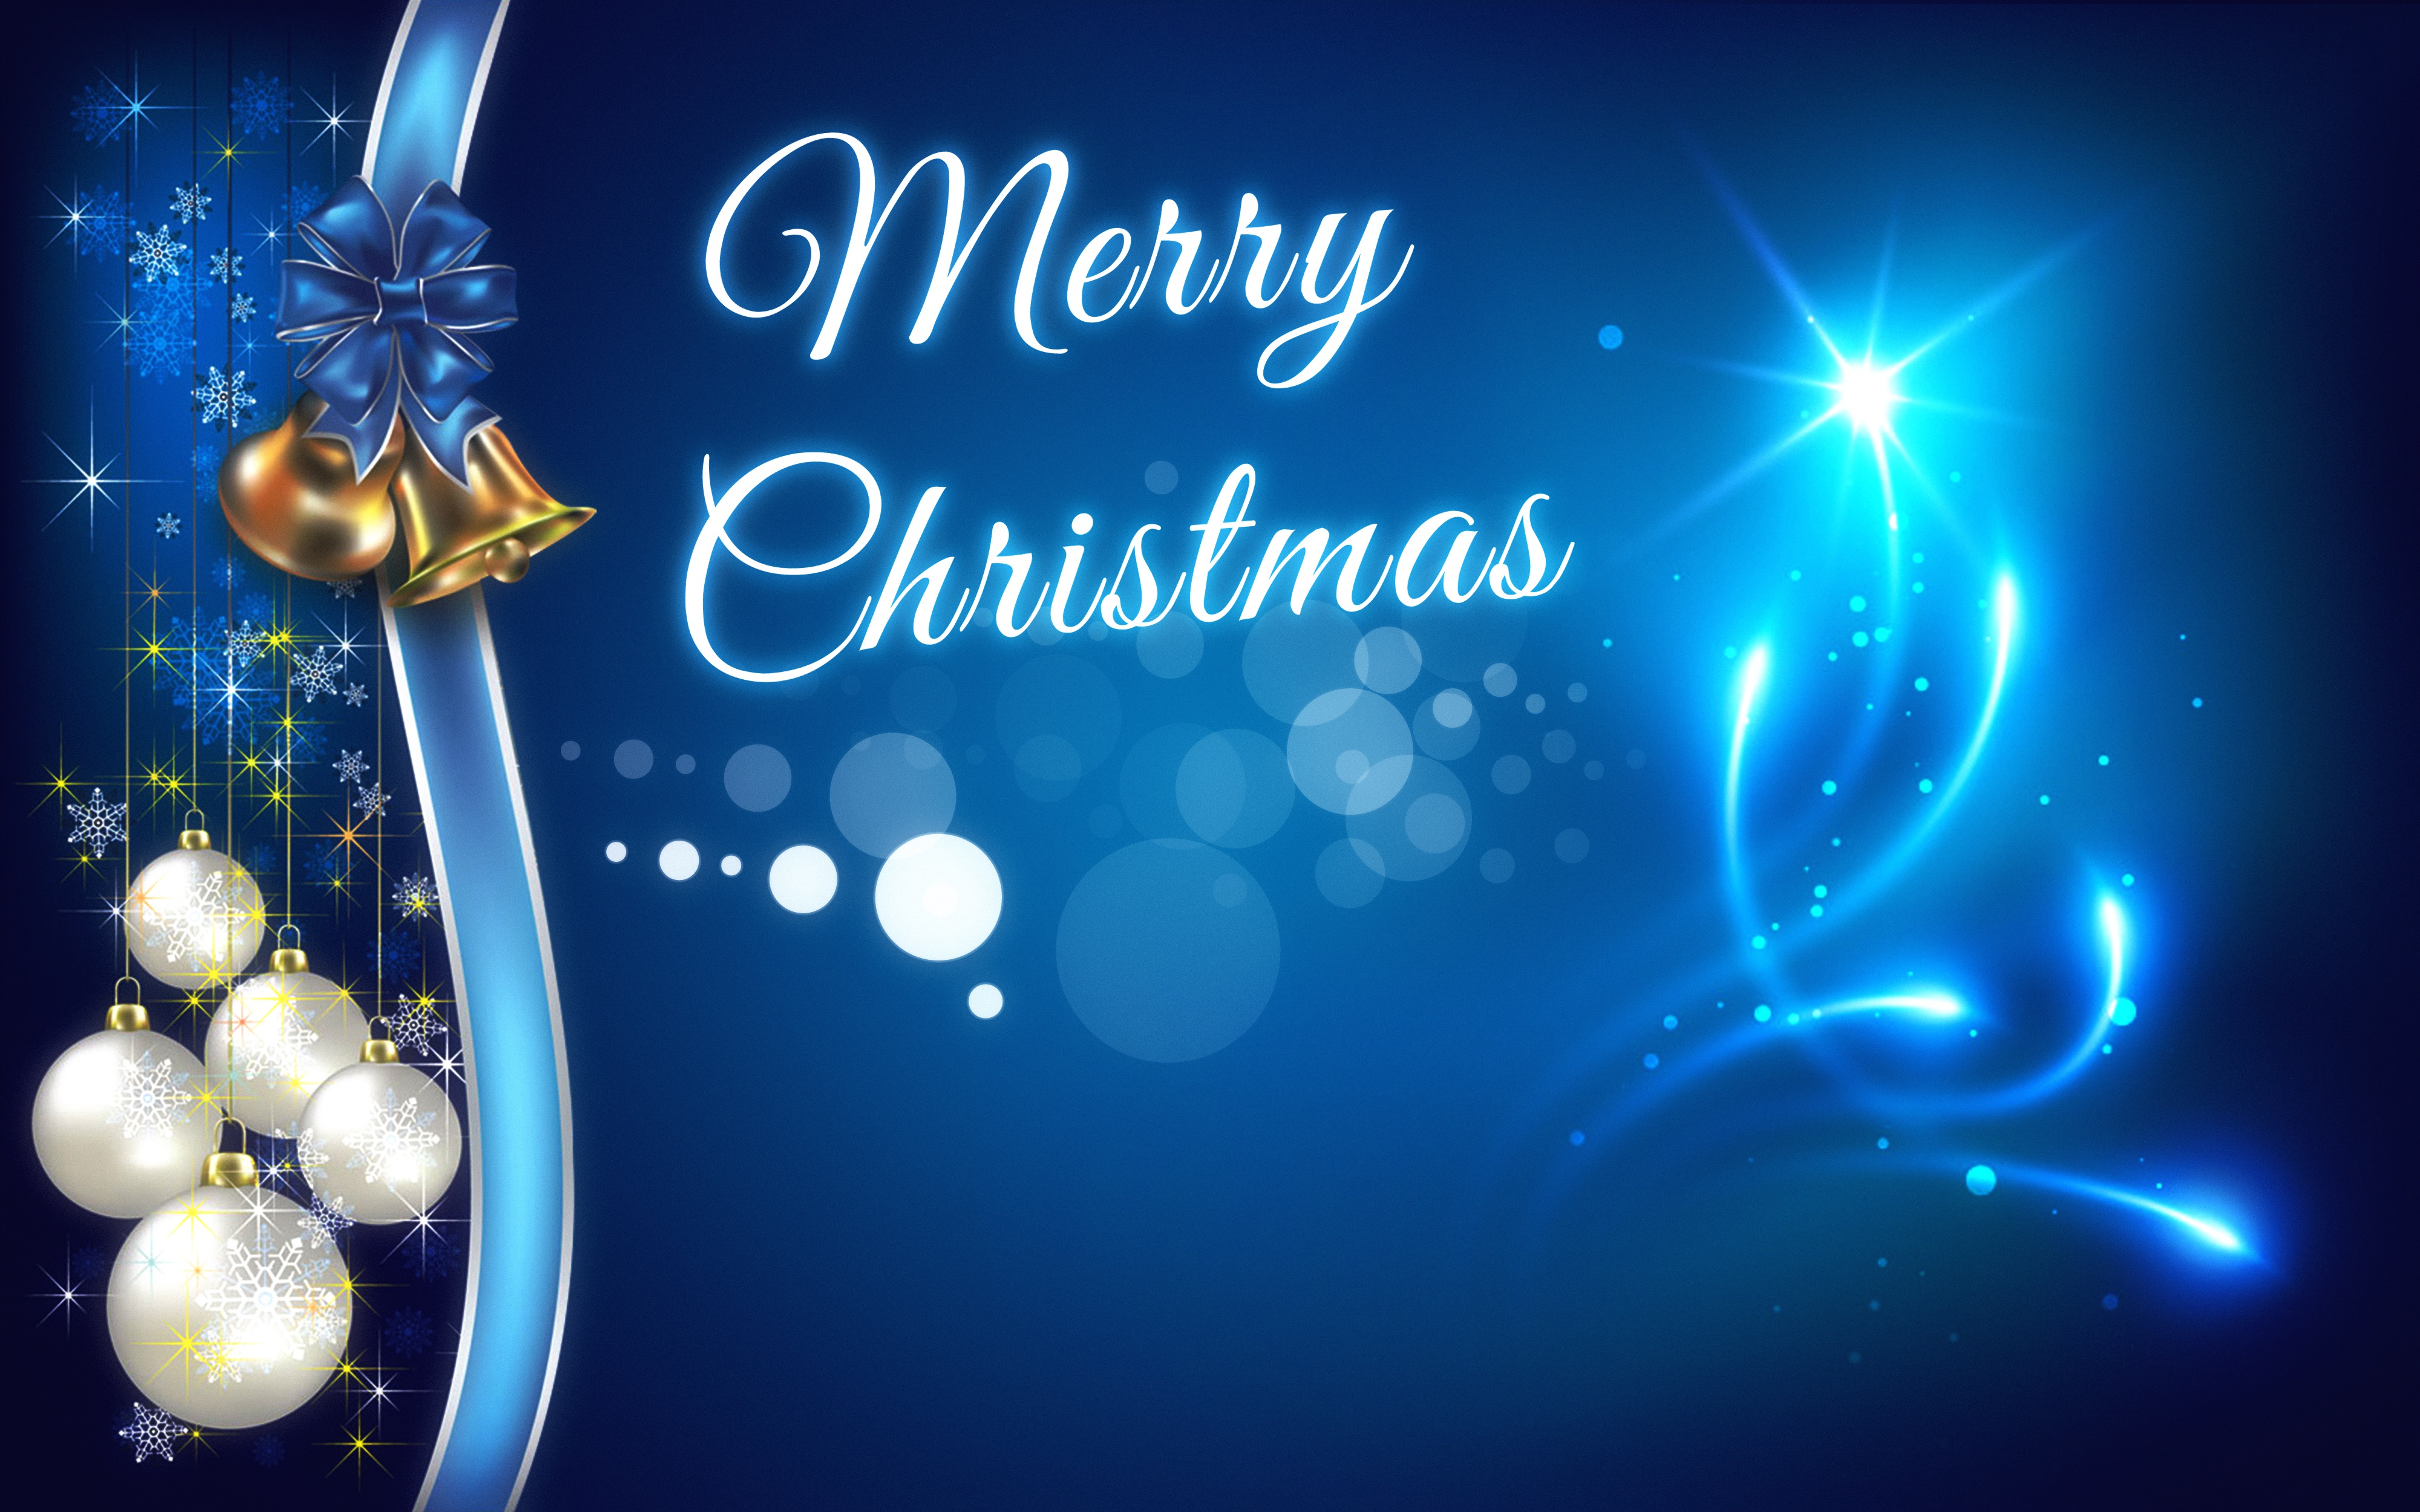 Merry Christmas Bauble Blue 4000x2500